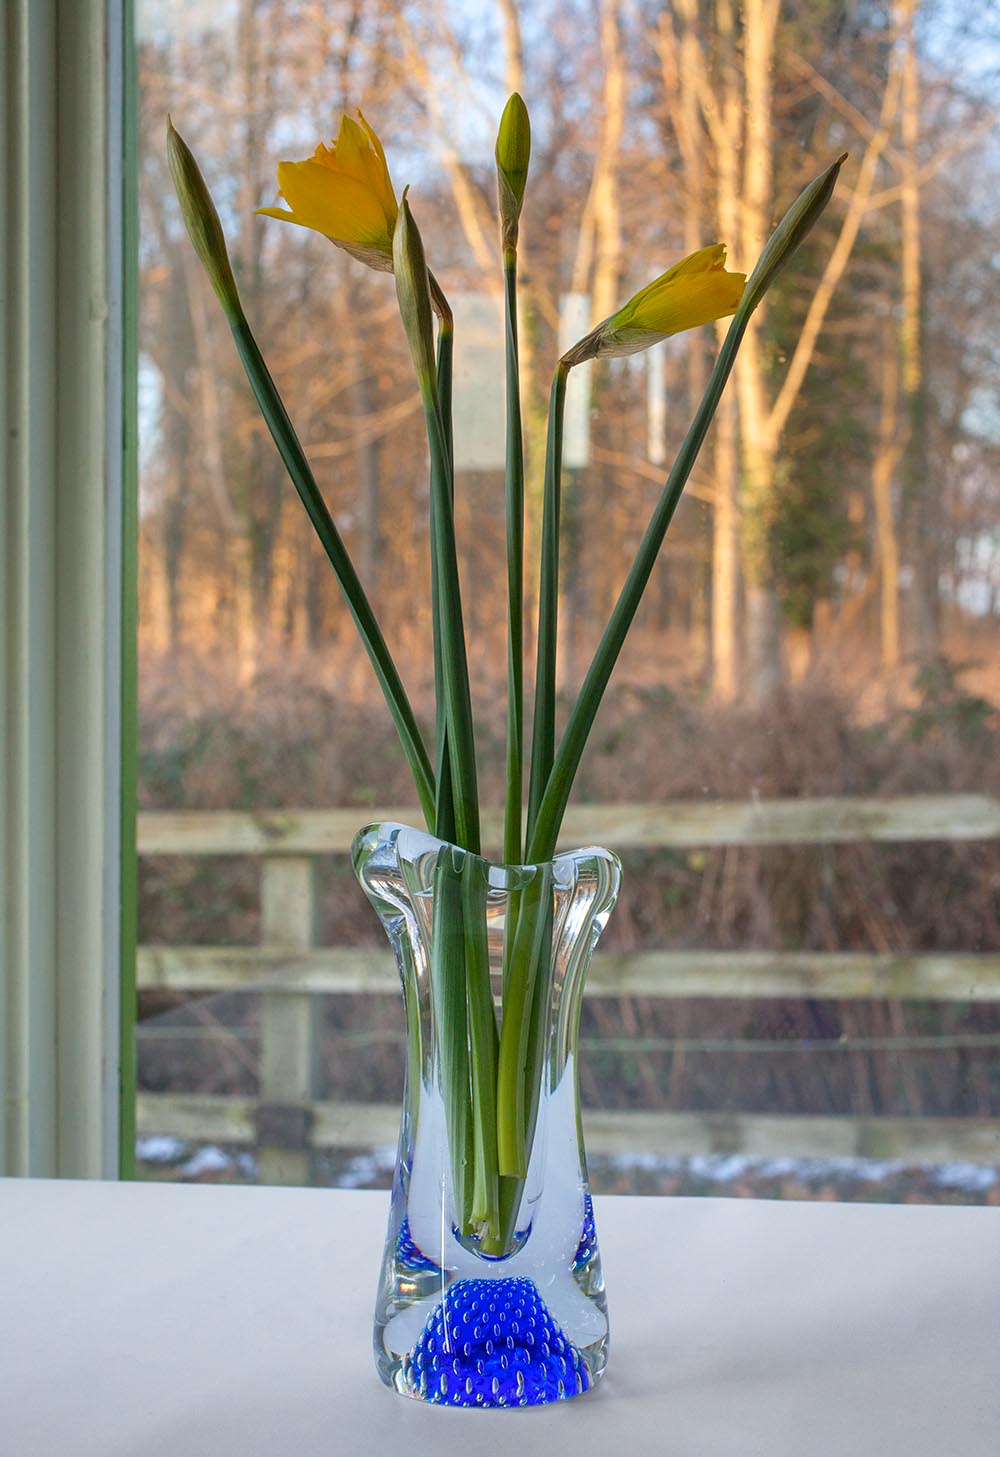 Daffodils in a Czech Bohemian glass vase, in front of a window through which can be seen a wood illuminated by early evening sunlight